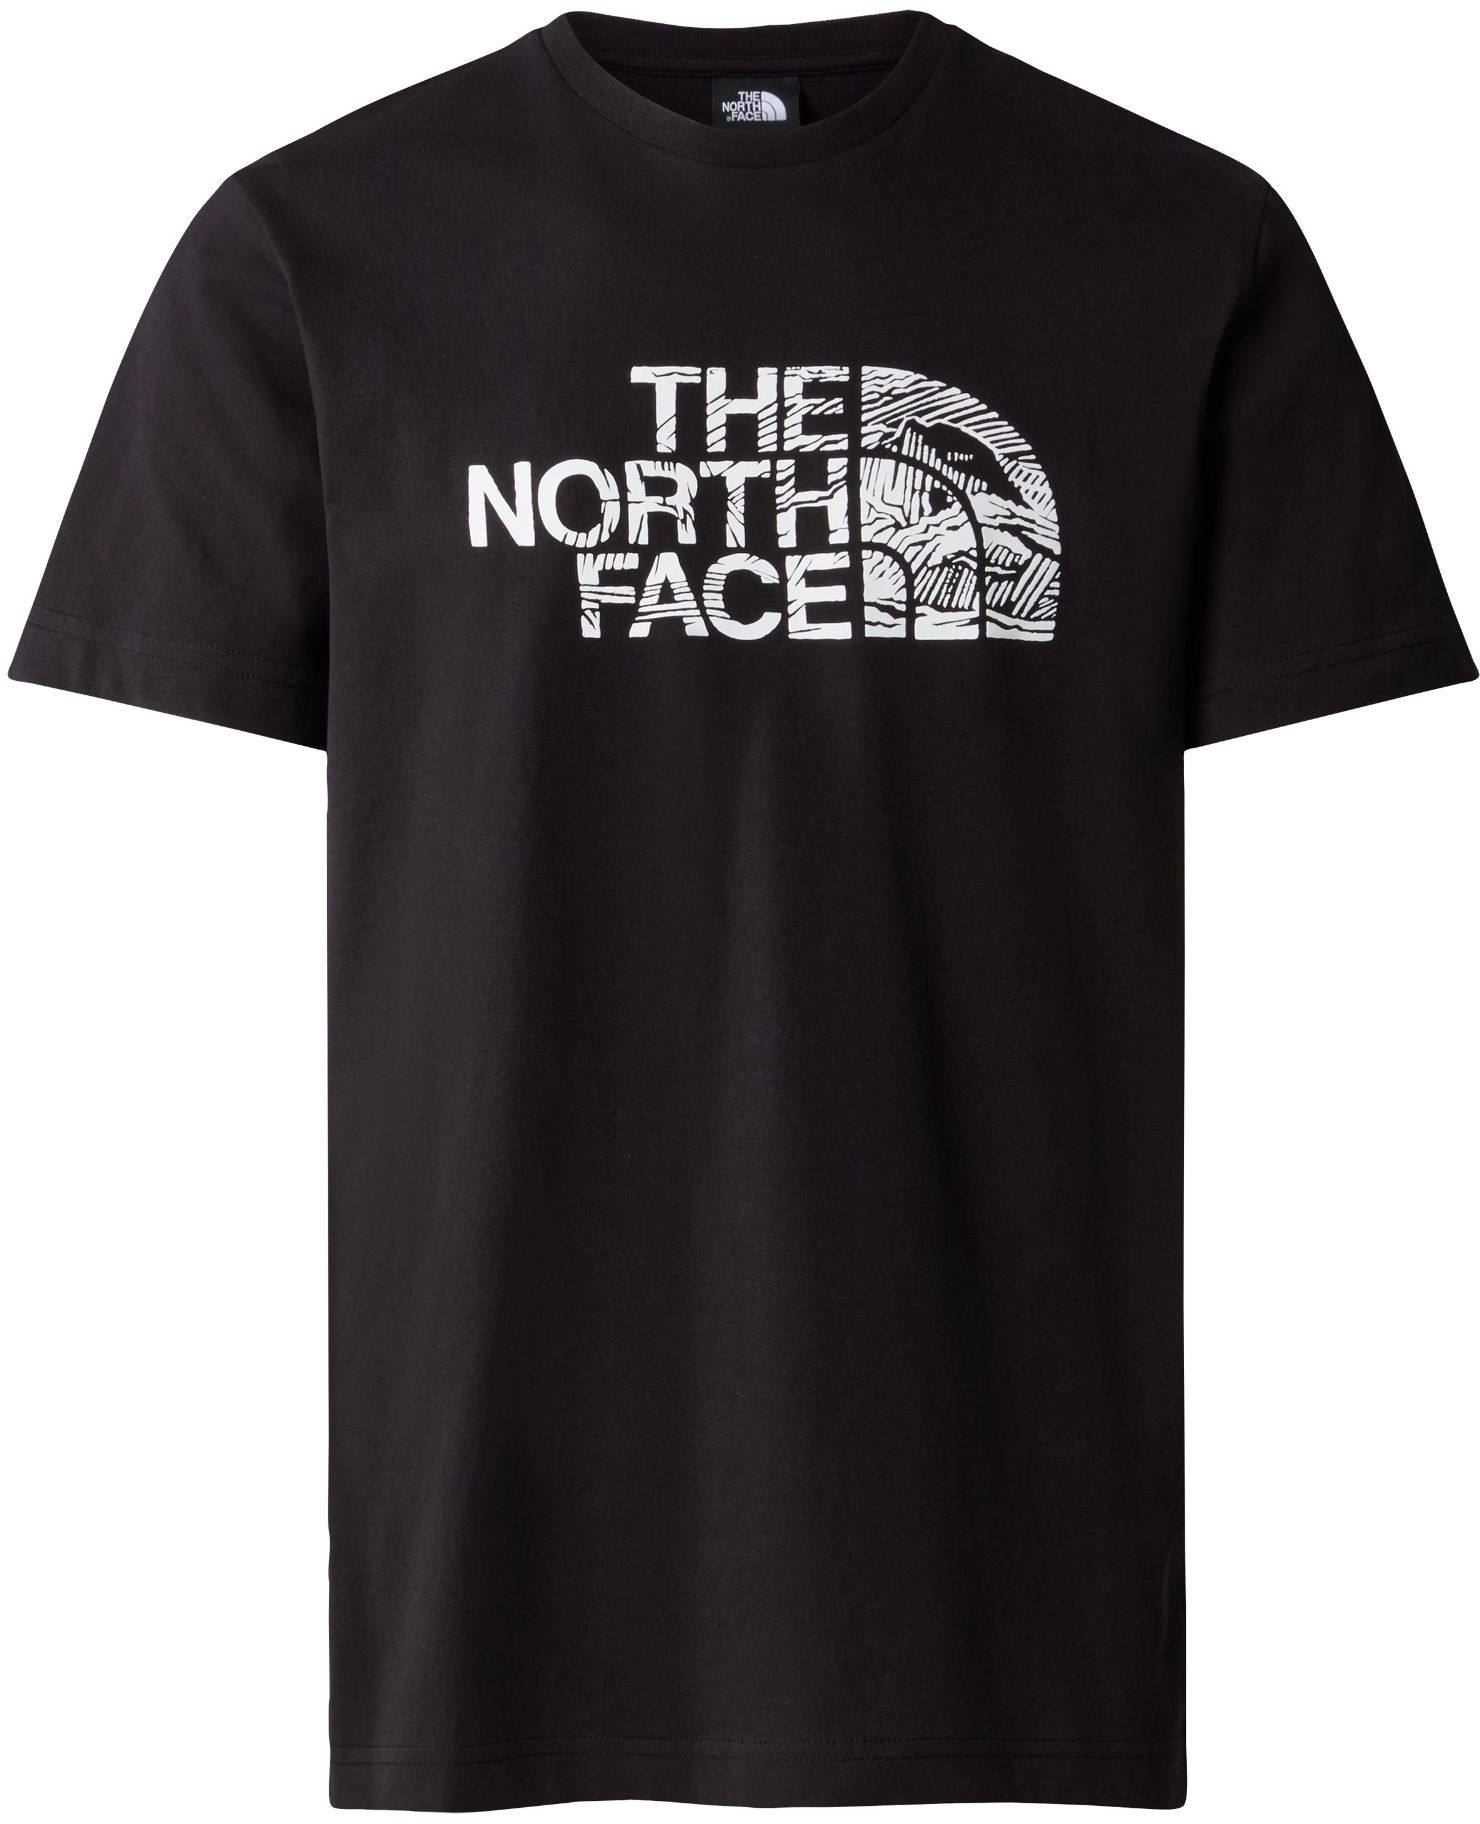 The North Face Men’s Woodcut Dome Tee